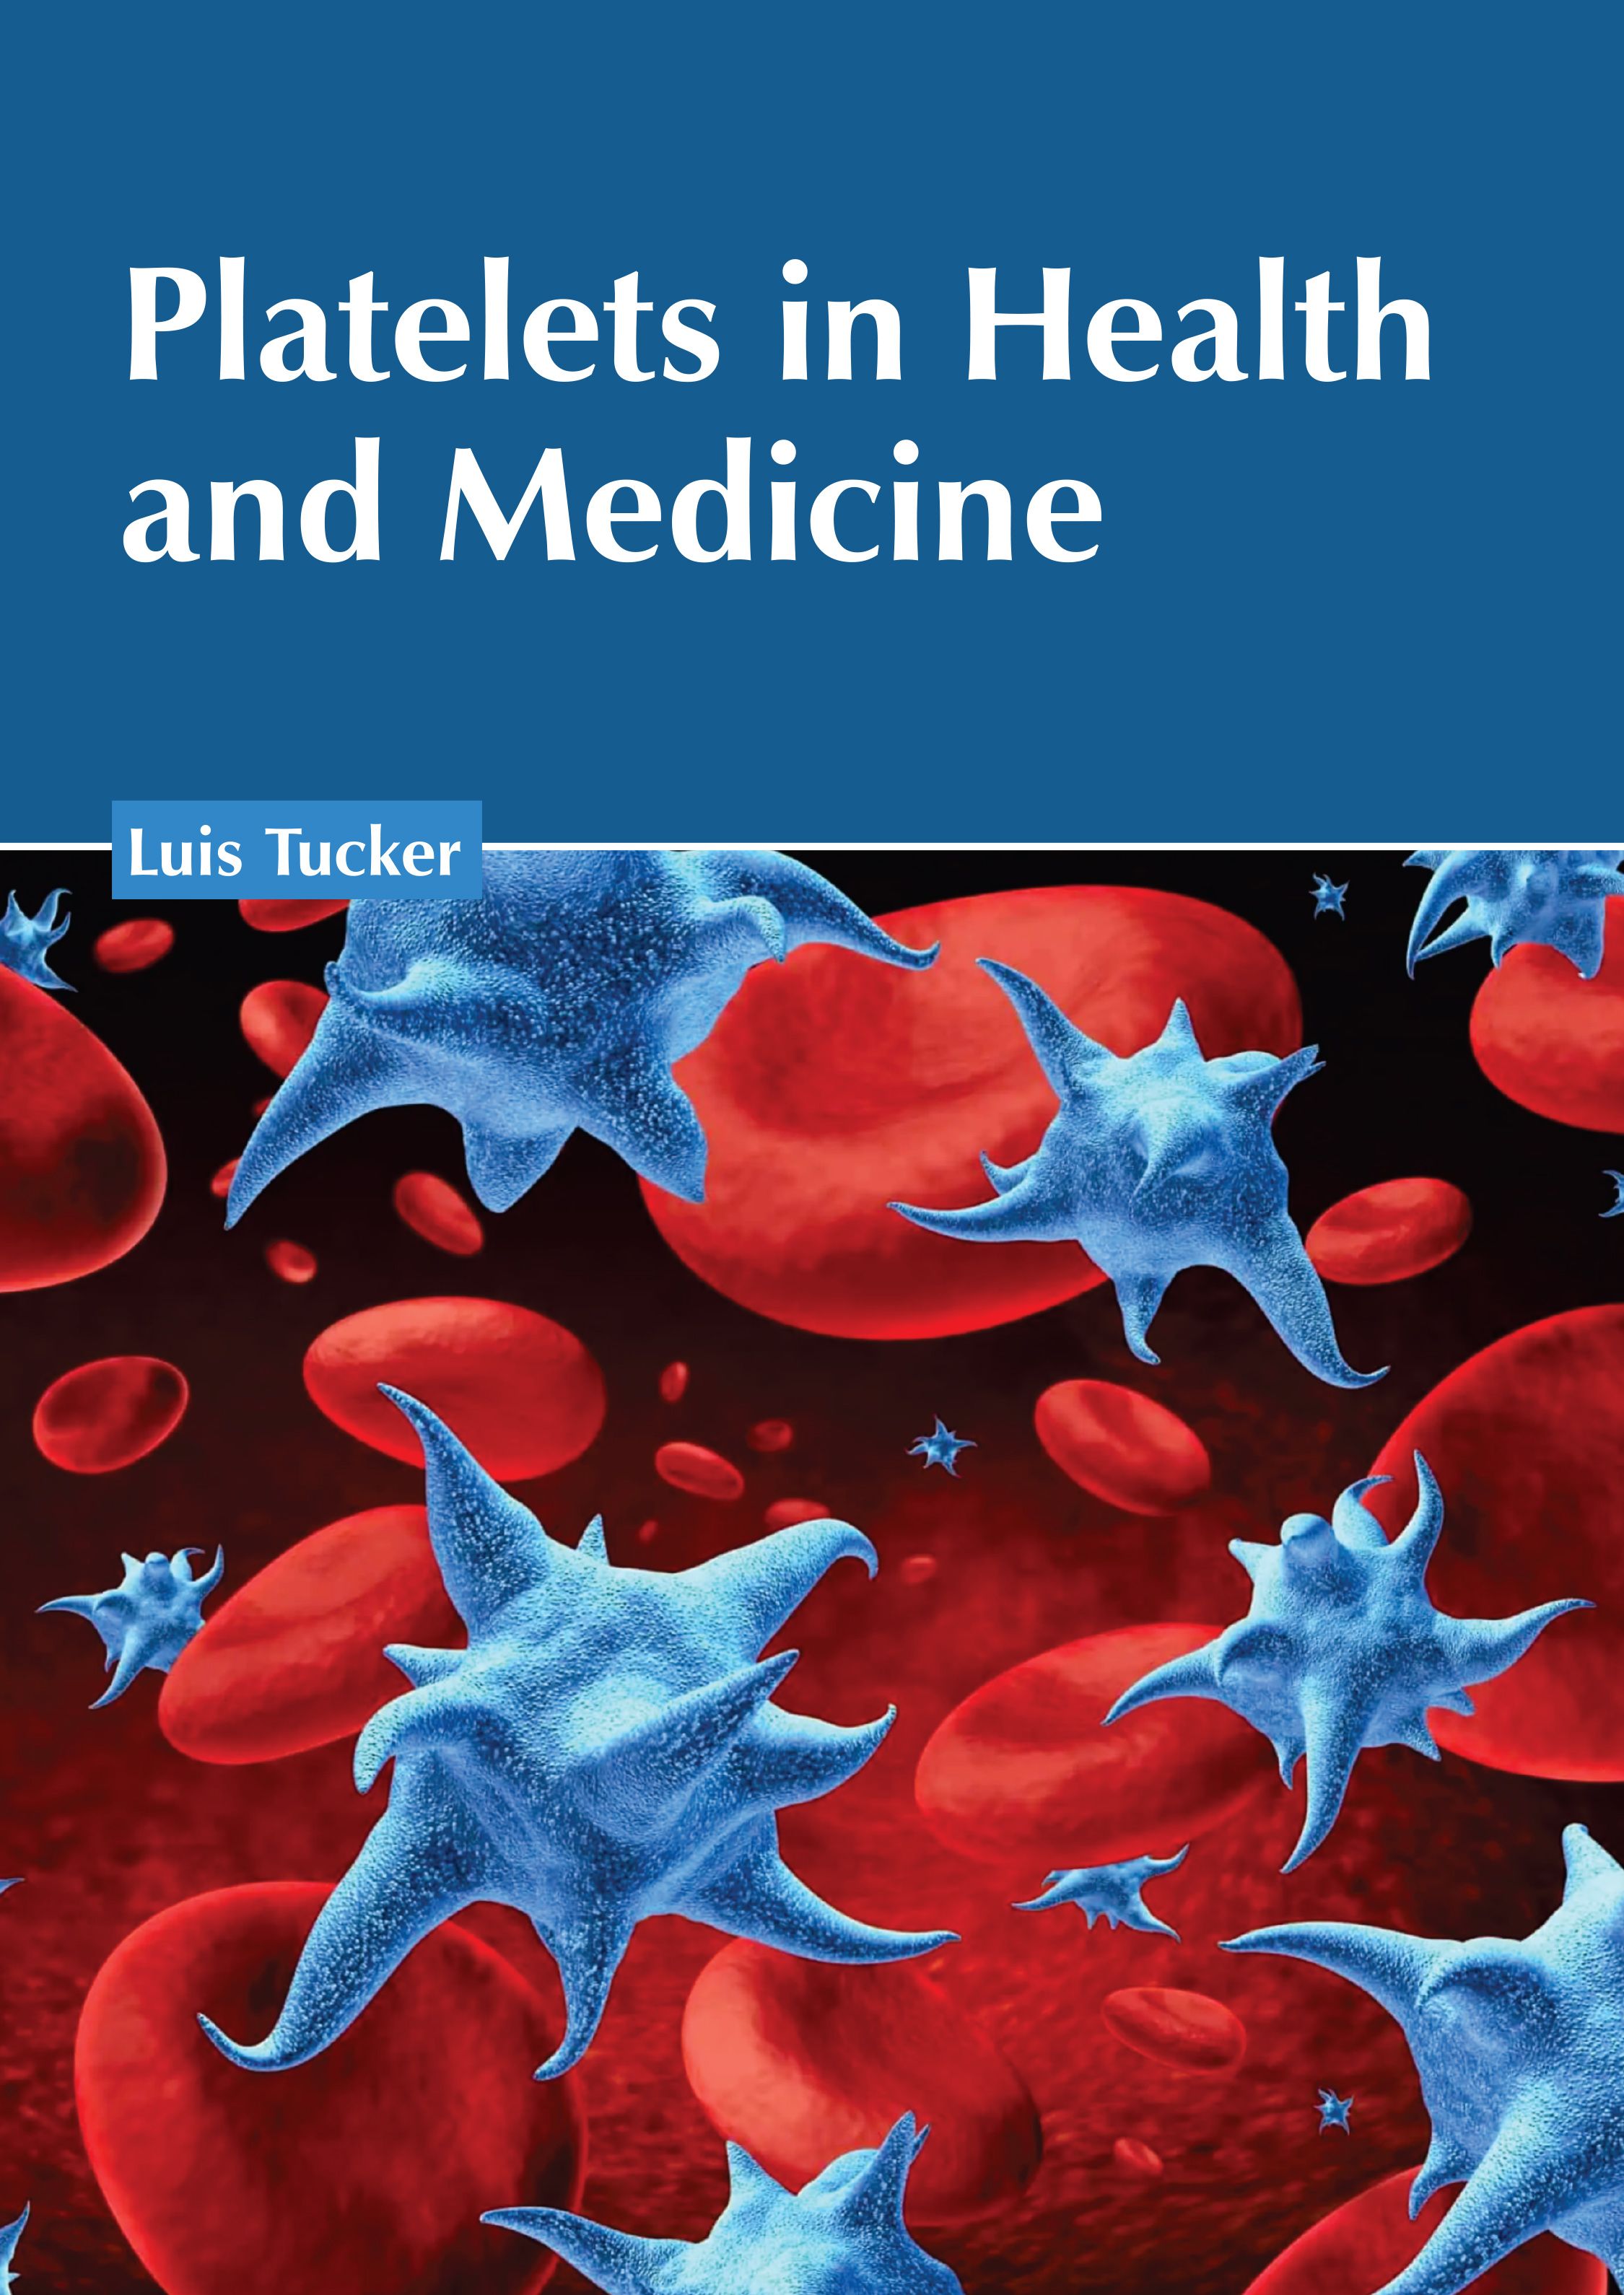 

exclusive-publishers/american-medical-publishers/platelets-in-health-and-medicine-9781639277872